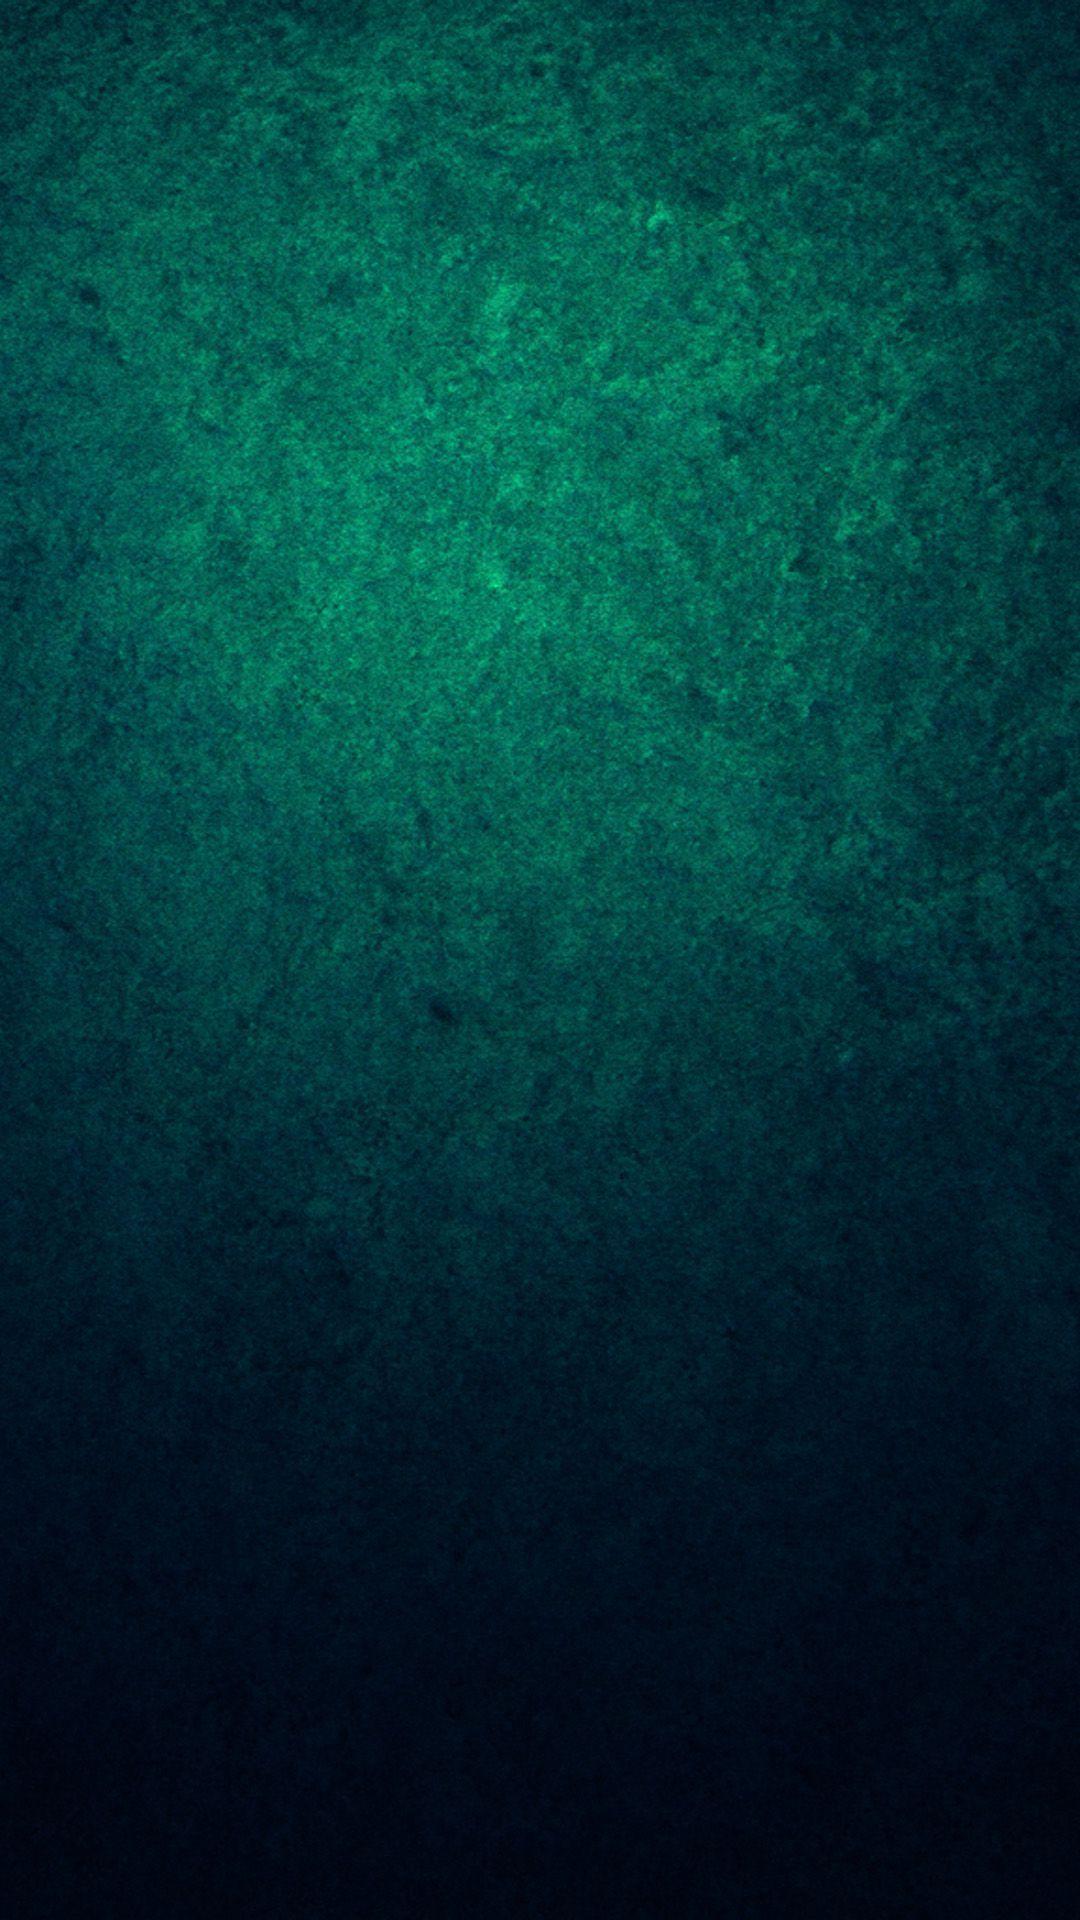 Green And Gold Wallpapers - Top Free Green And Gold Backgrounds